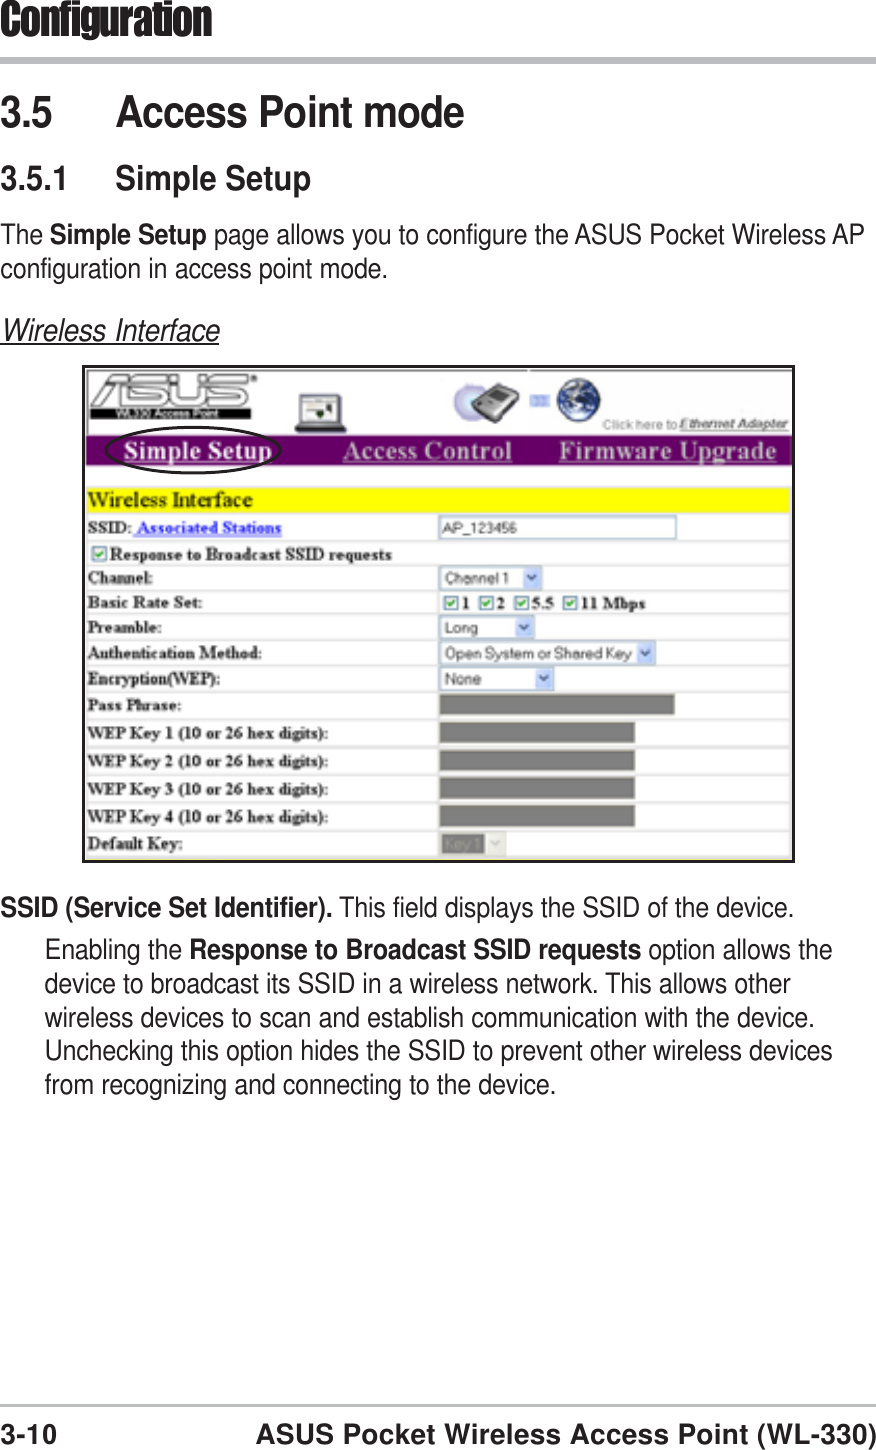 3-10ASUS Pocket Wireless Access Point (WL-330)Configuration3.5 Access Point mode3.5.1 Simple SetupThe Simple Setup page allows you to configure the ASUS Pocket Wireless APconfiguration in access point mode.Wireless InterfaceSSID (Service Set Identifier). This field displays the SSID of the device.Enabling the Response to Broadcast SSID requests option allows thedevice to broadcast its SSID in a wireless network. This allows otherwireless devices to scan and establish communication with the device.Unchecking this option hides the SSID to prevent other wireless devicesfrom recognizing and connecting to the device.